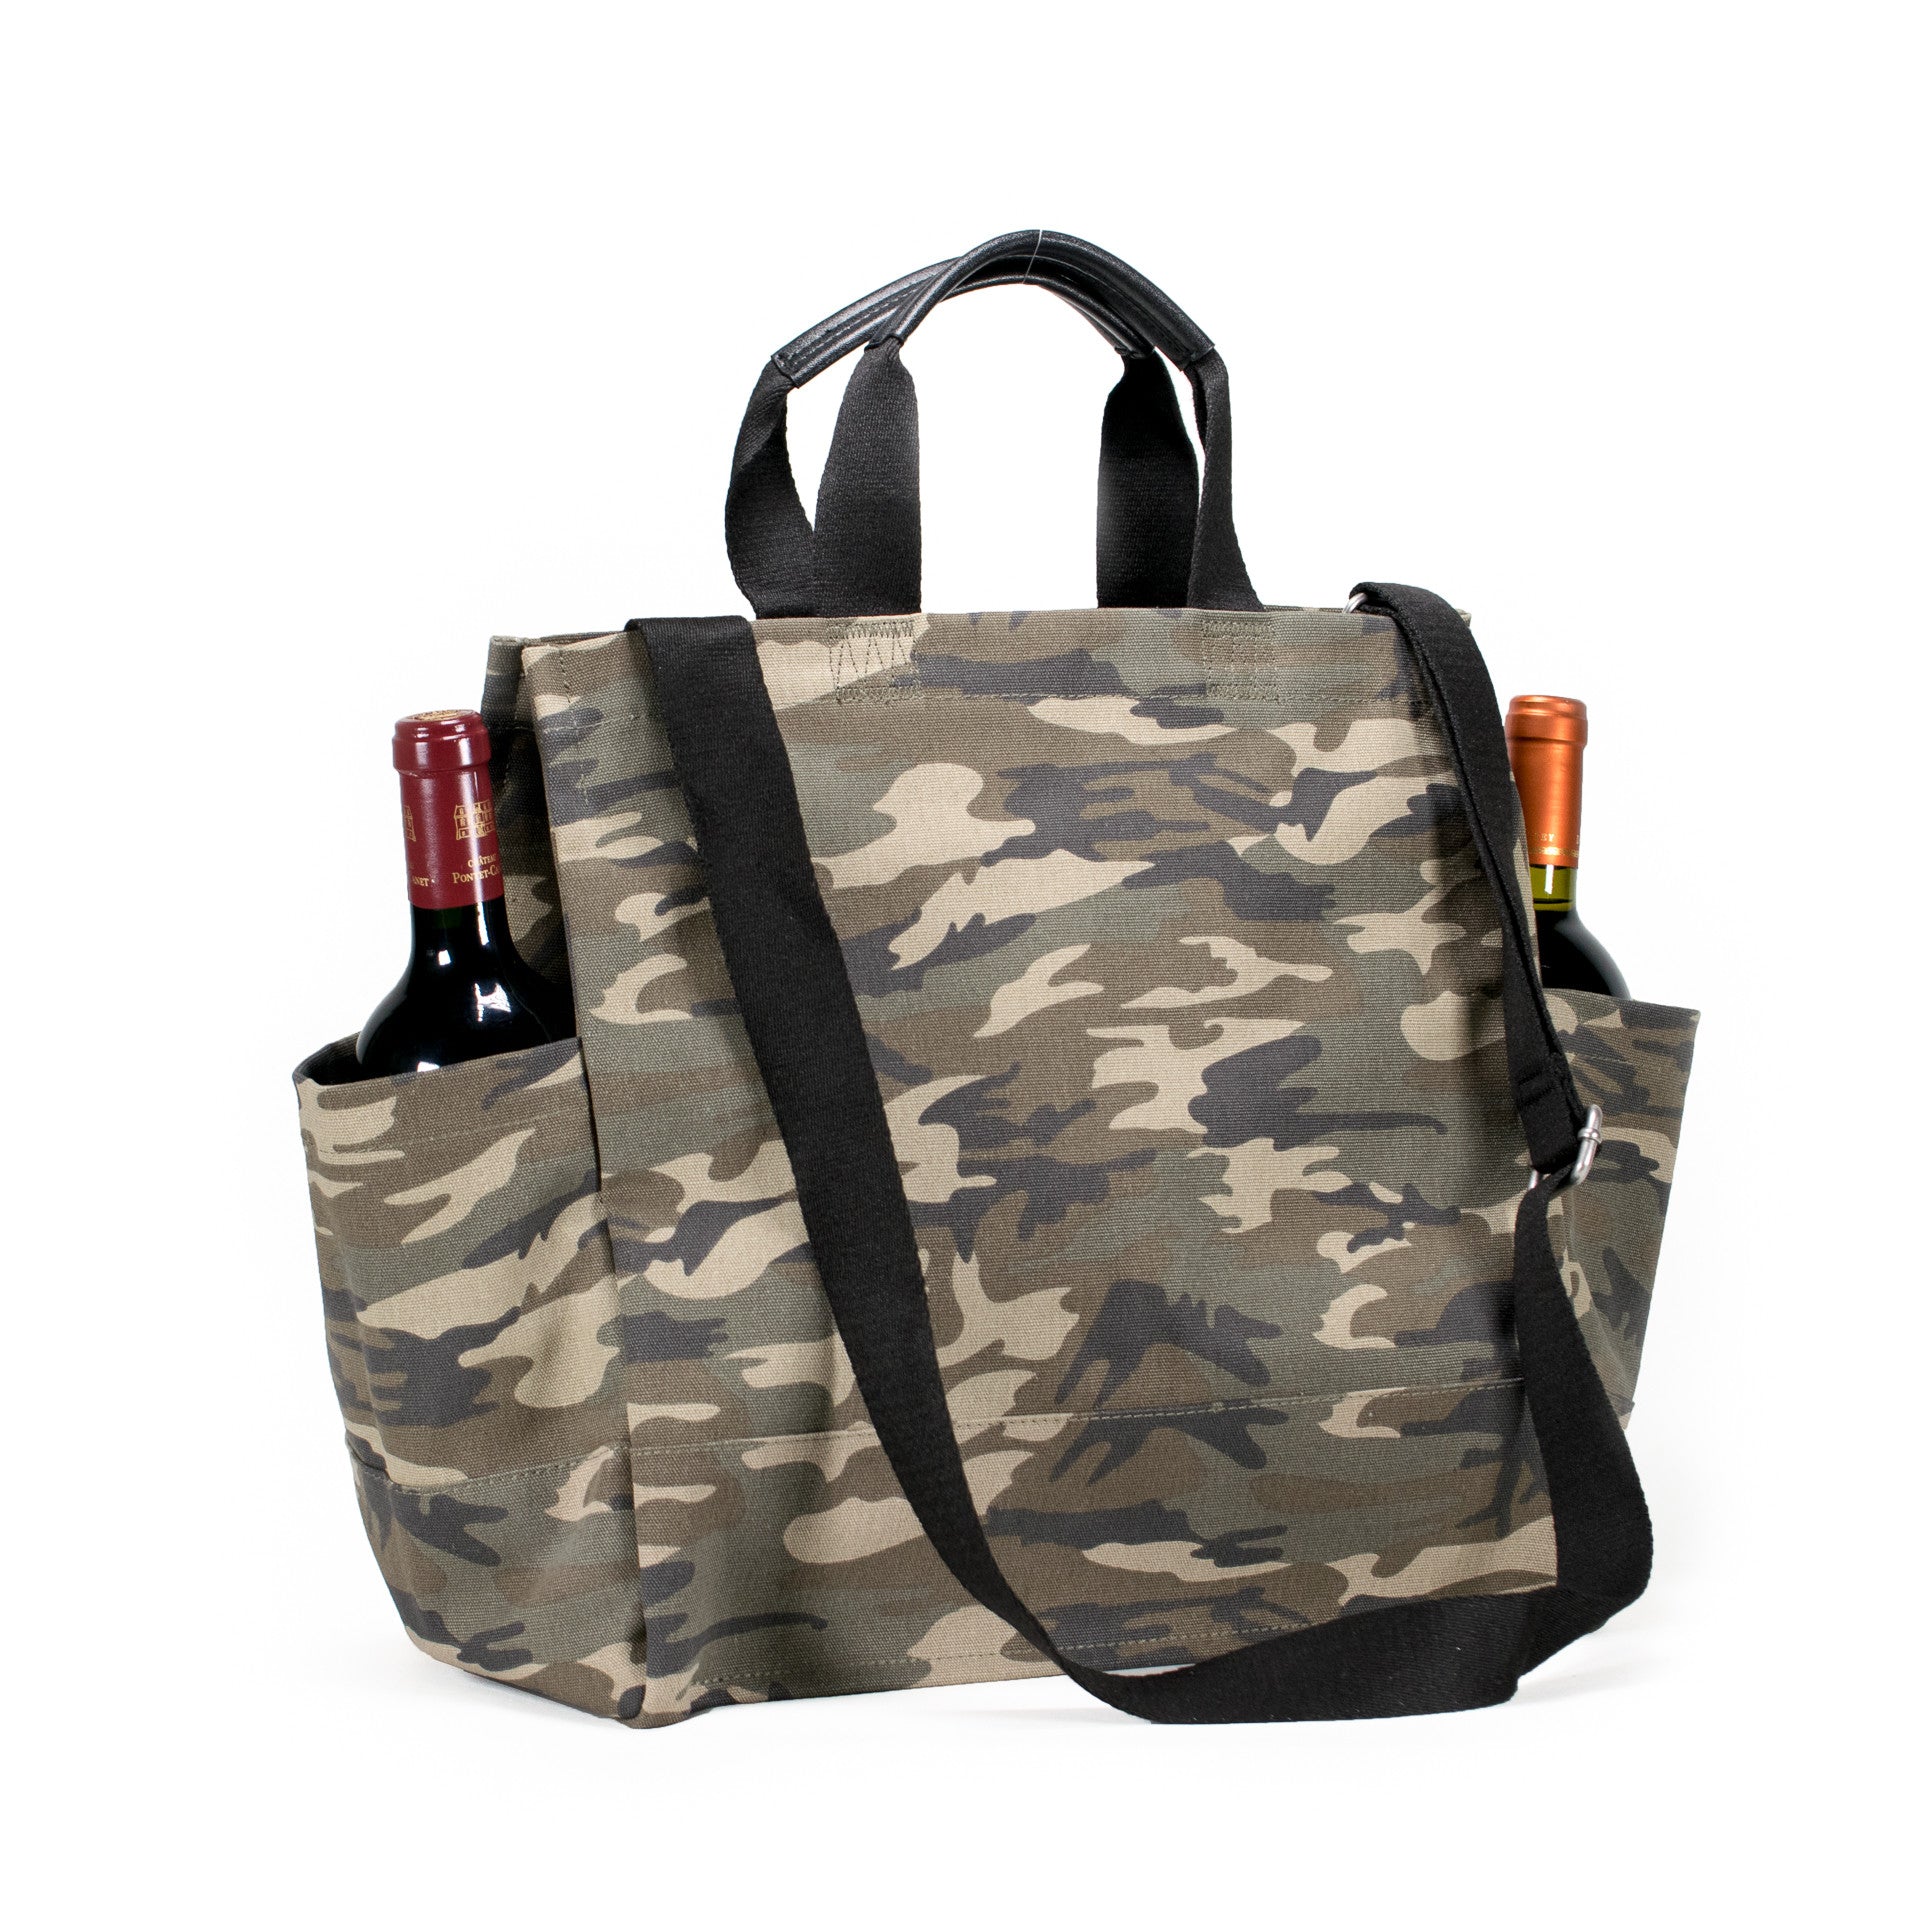 Luxe North-South Bag: Camouflage - Quilted Koala